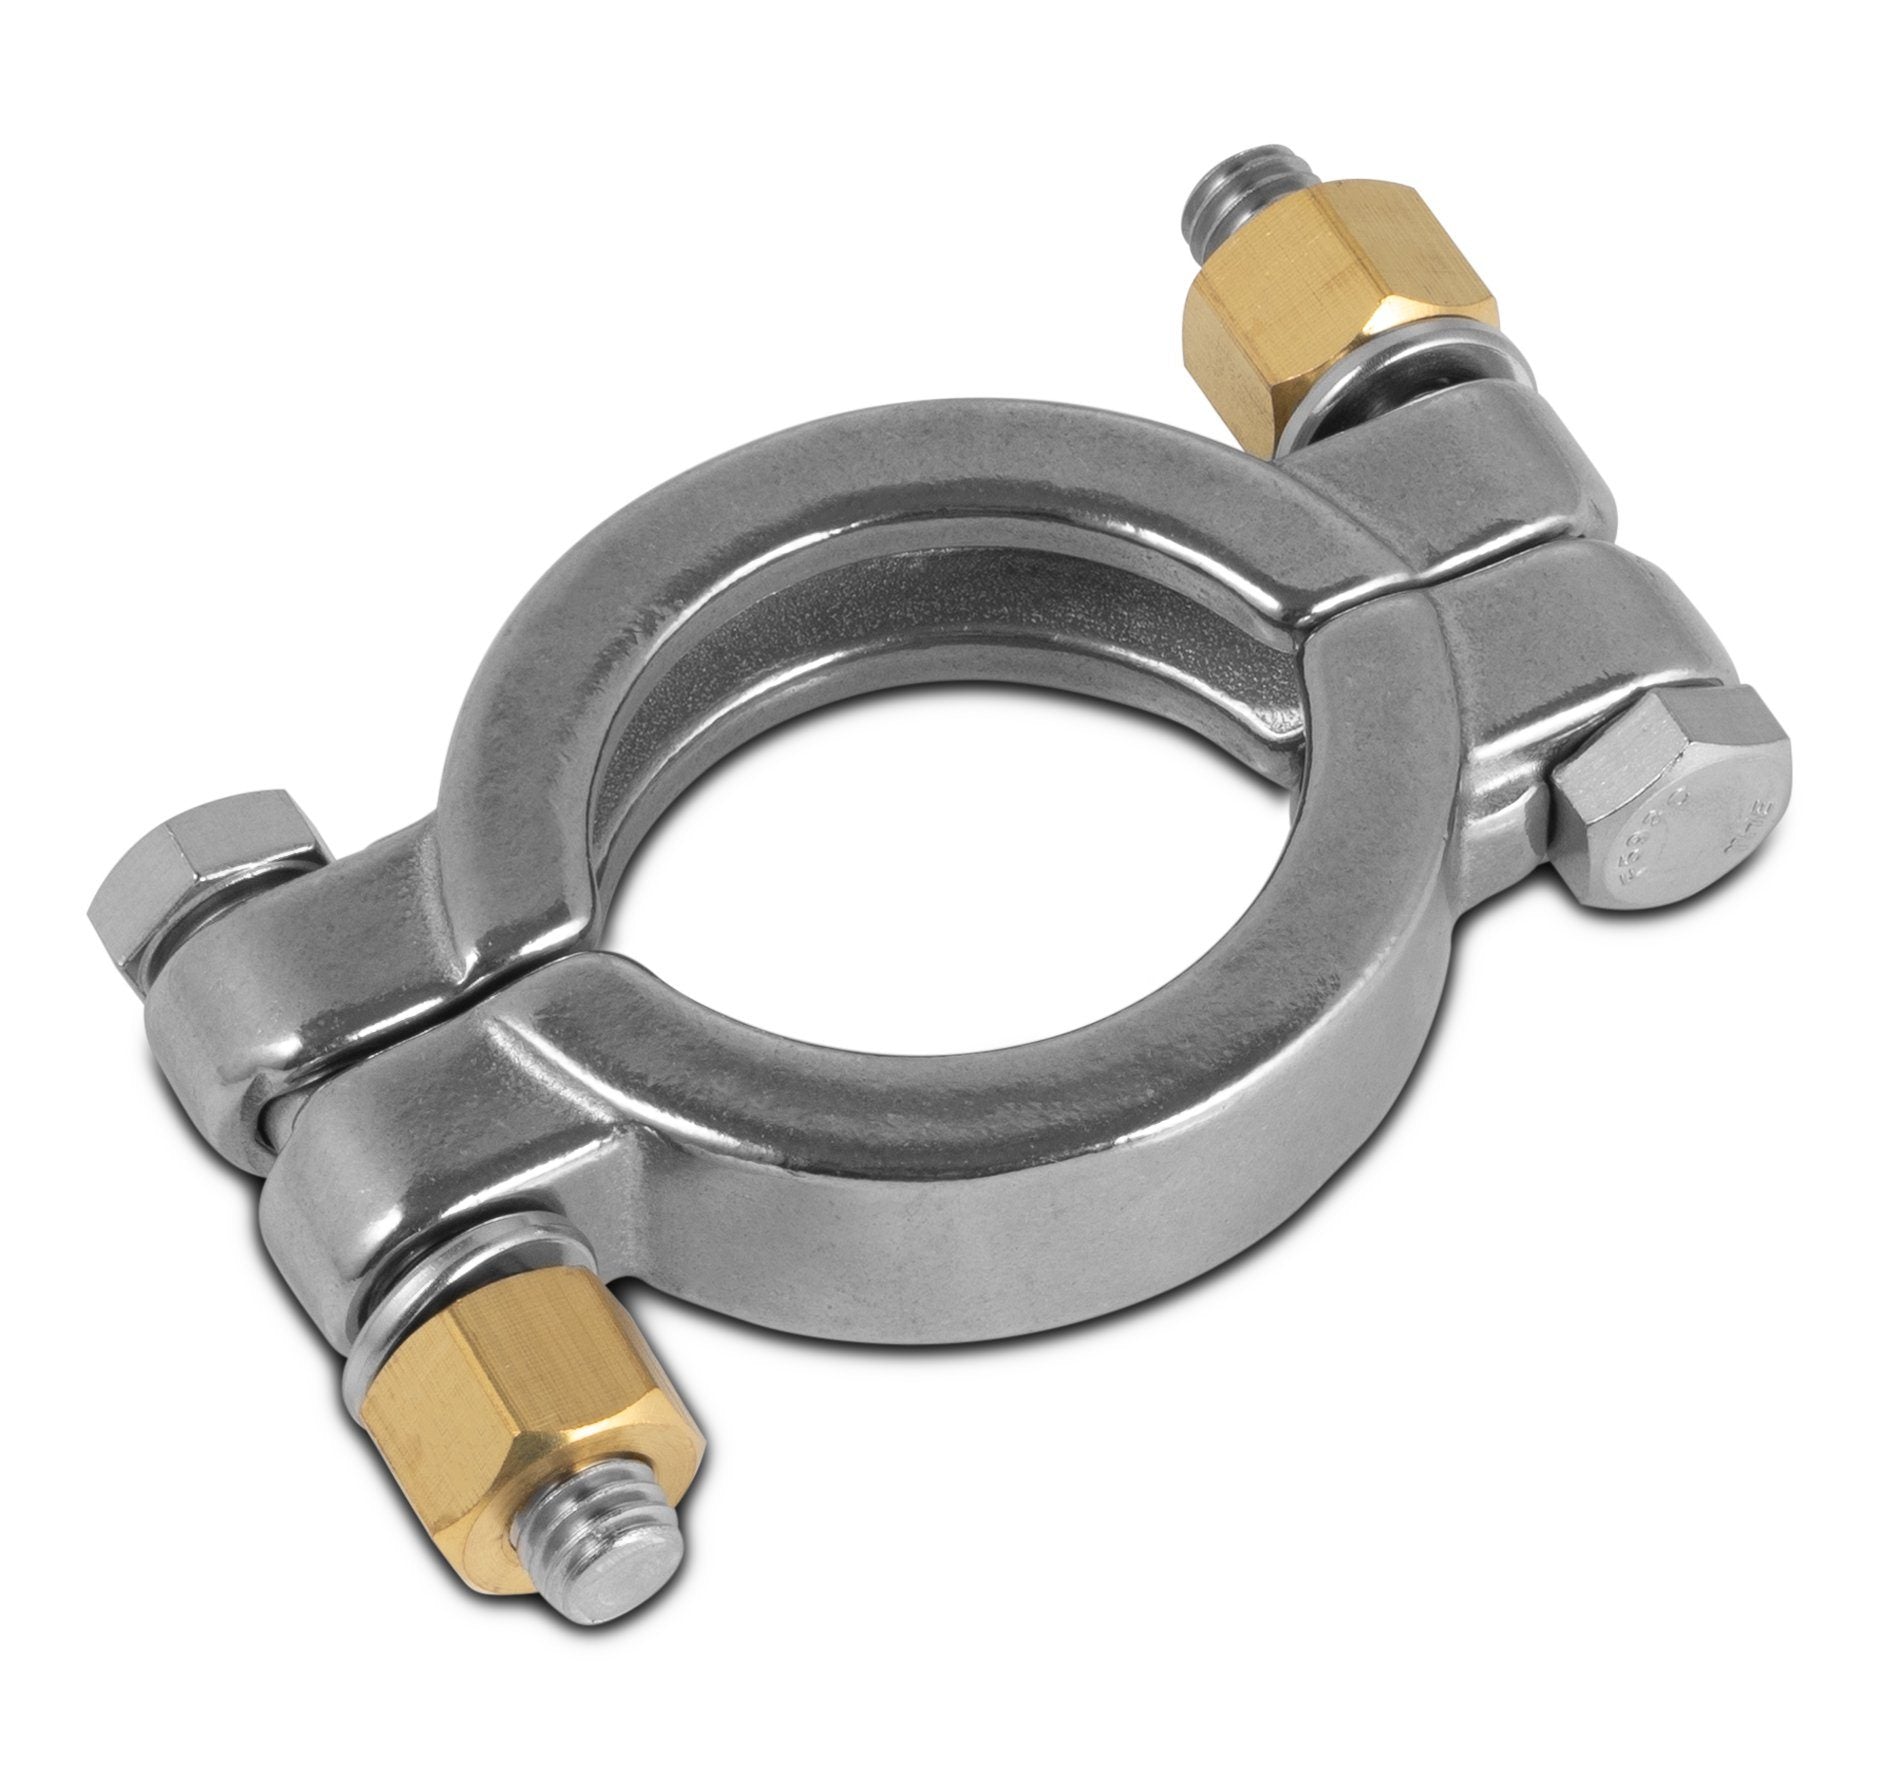 High Pressure Clamps Shop All Categories BVV 1.5-inch 